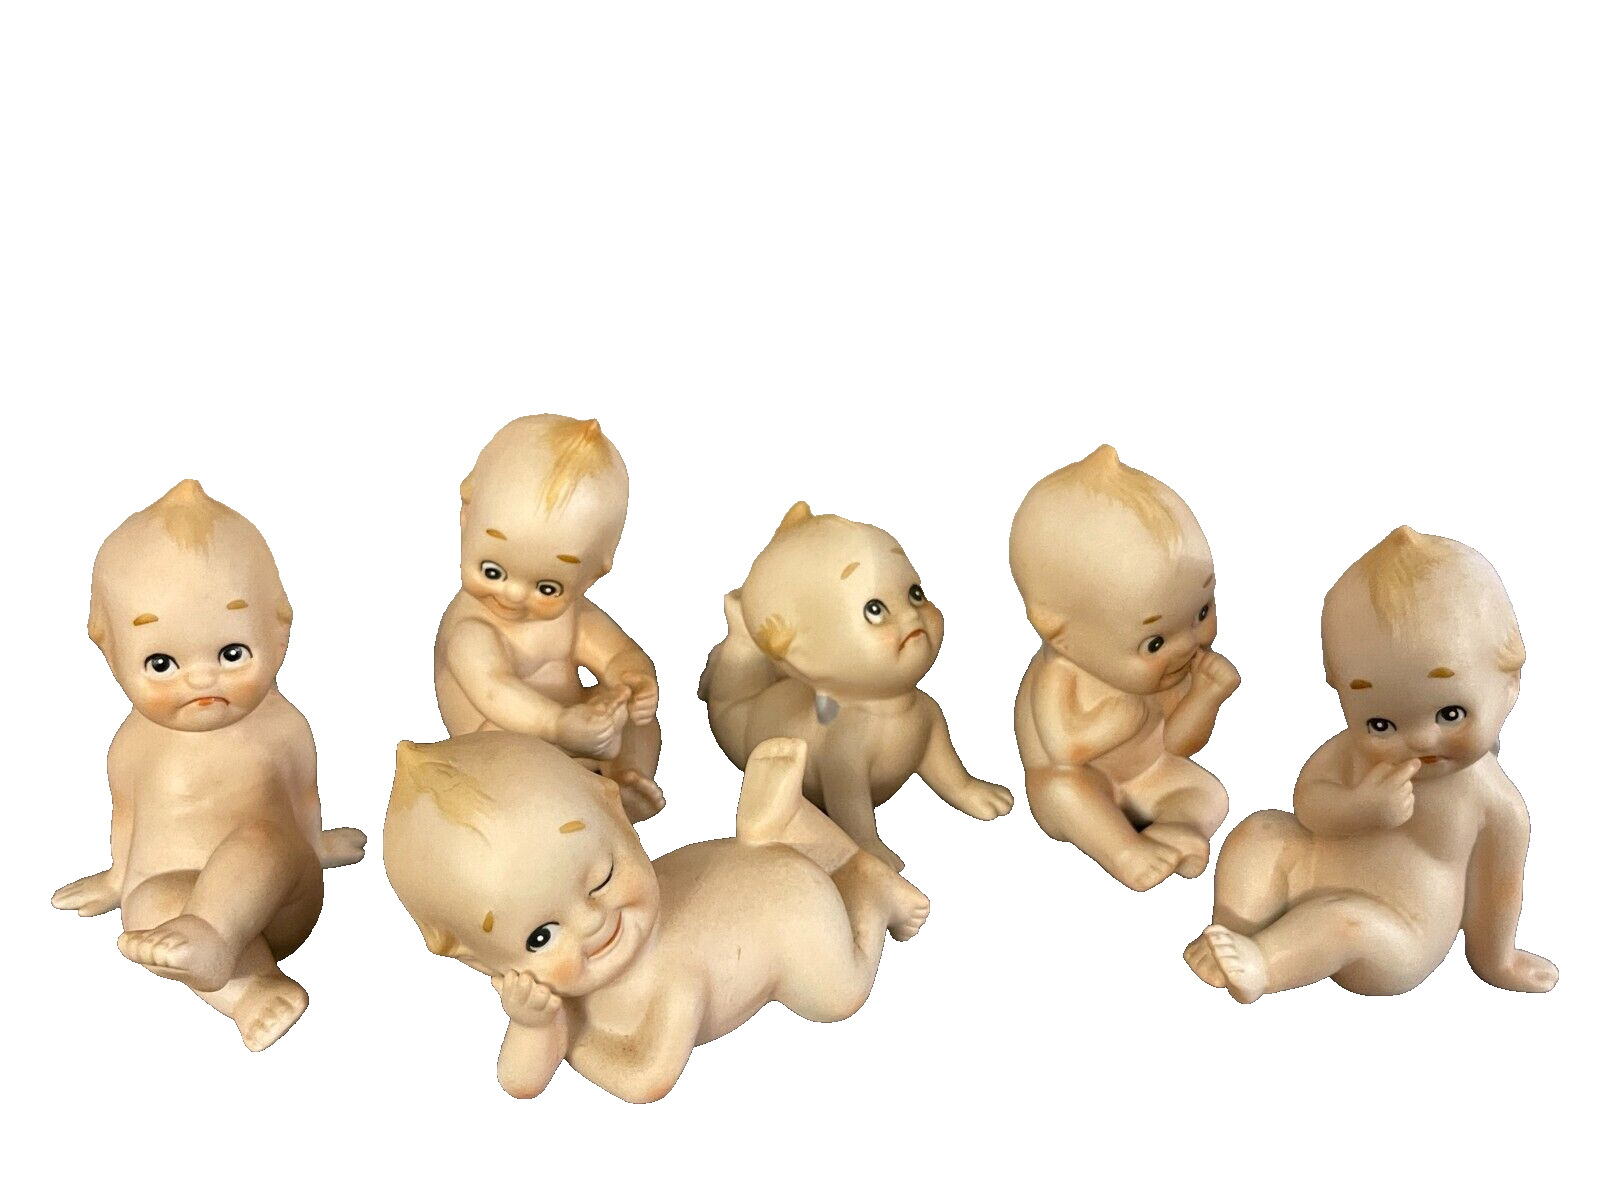 VINTAGE PORCELAIN GAGGLE OF KEWPIES  6 FIGURINES DIFFERENT POSES ROSE O'NEILL